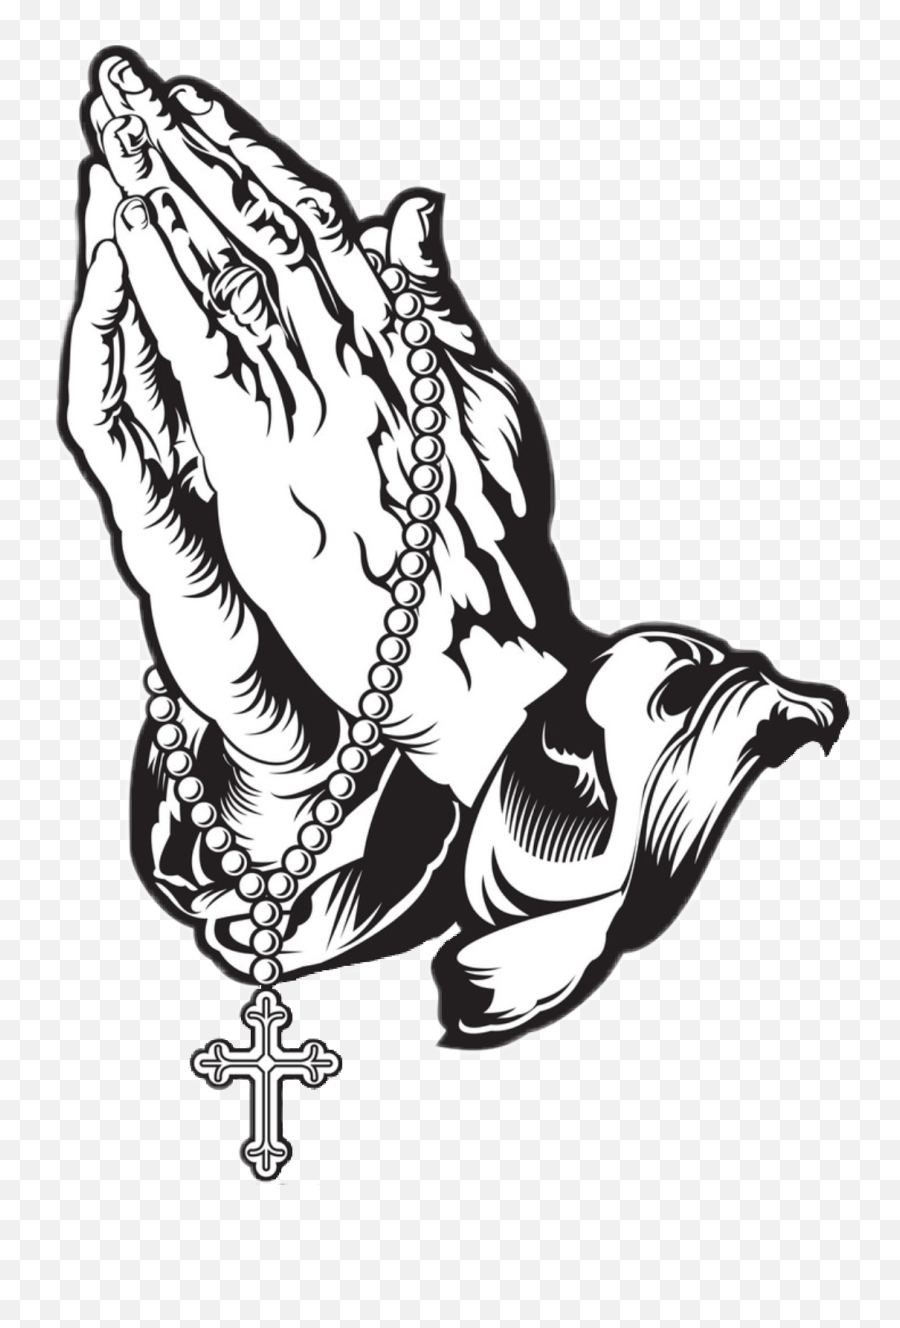 Largest Collection Of Free - Toedit Amen Stickers Praying Hands With Rosary Outline Emoji,Amen Emoji